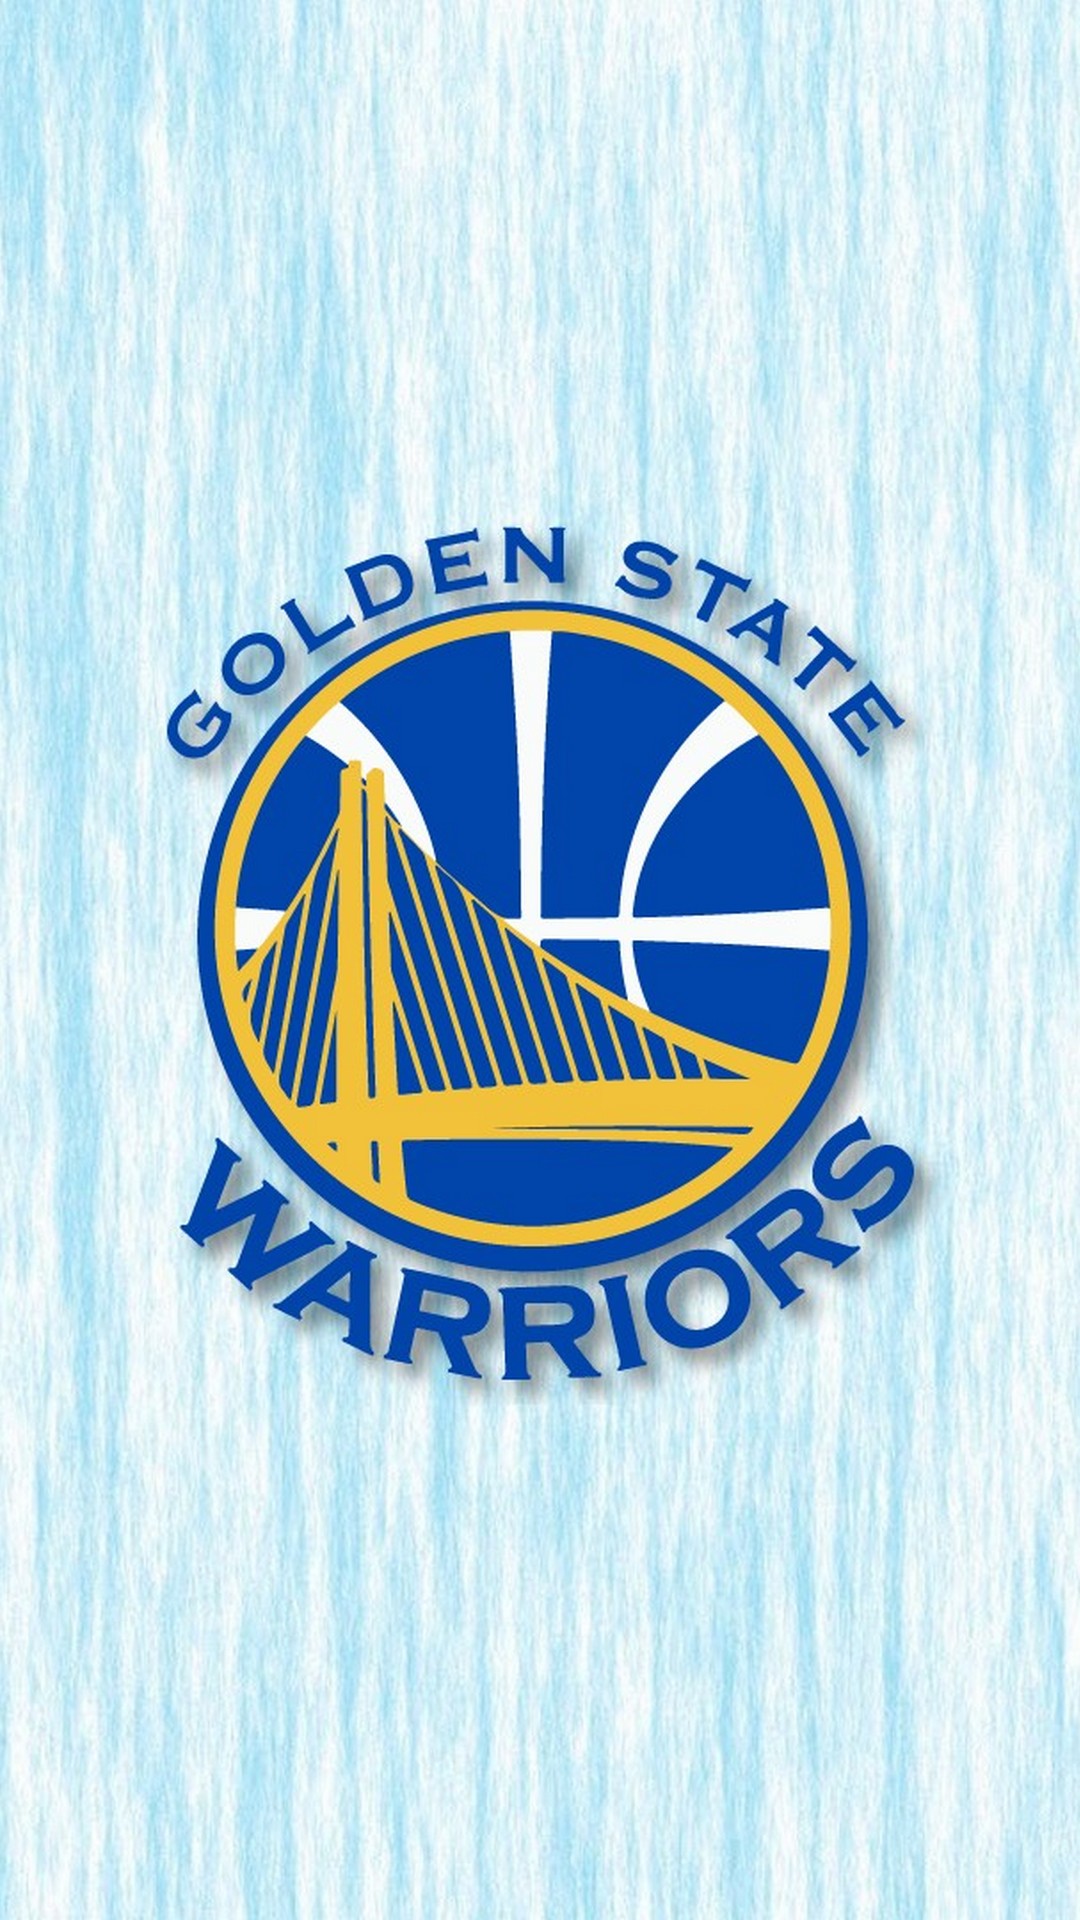 Iphone X Wallpaper Golden State Warriors With Image - Golden State Warriors - HD Wallpaper 